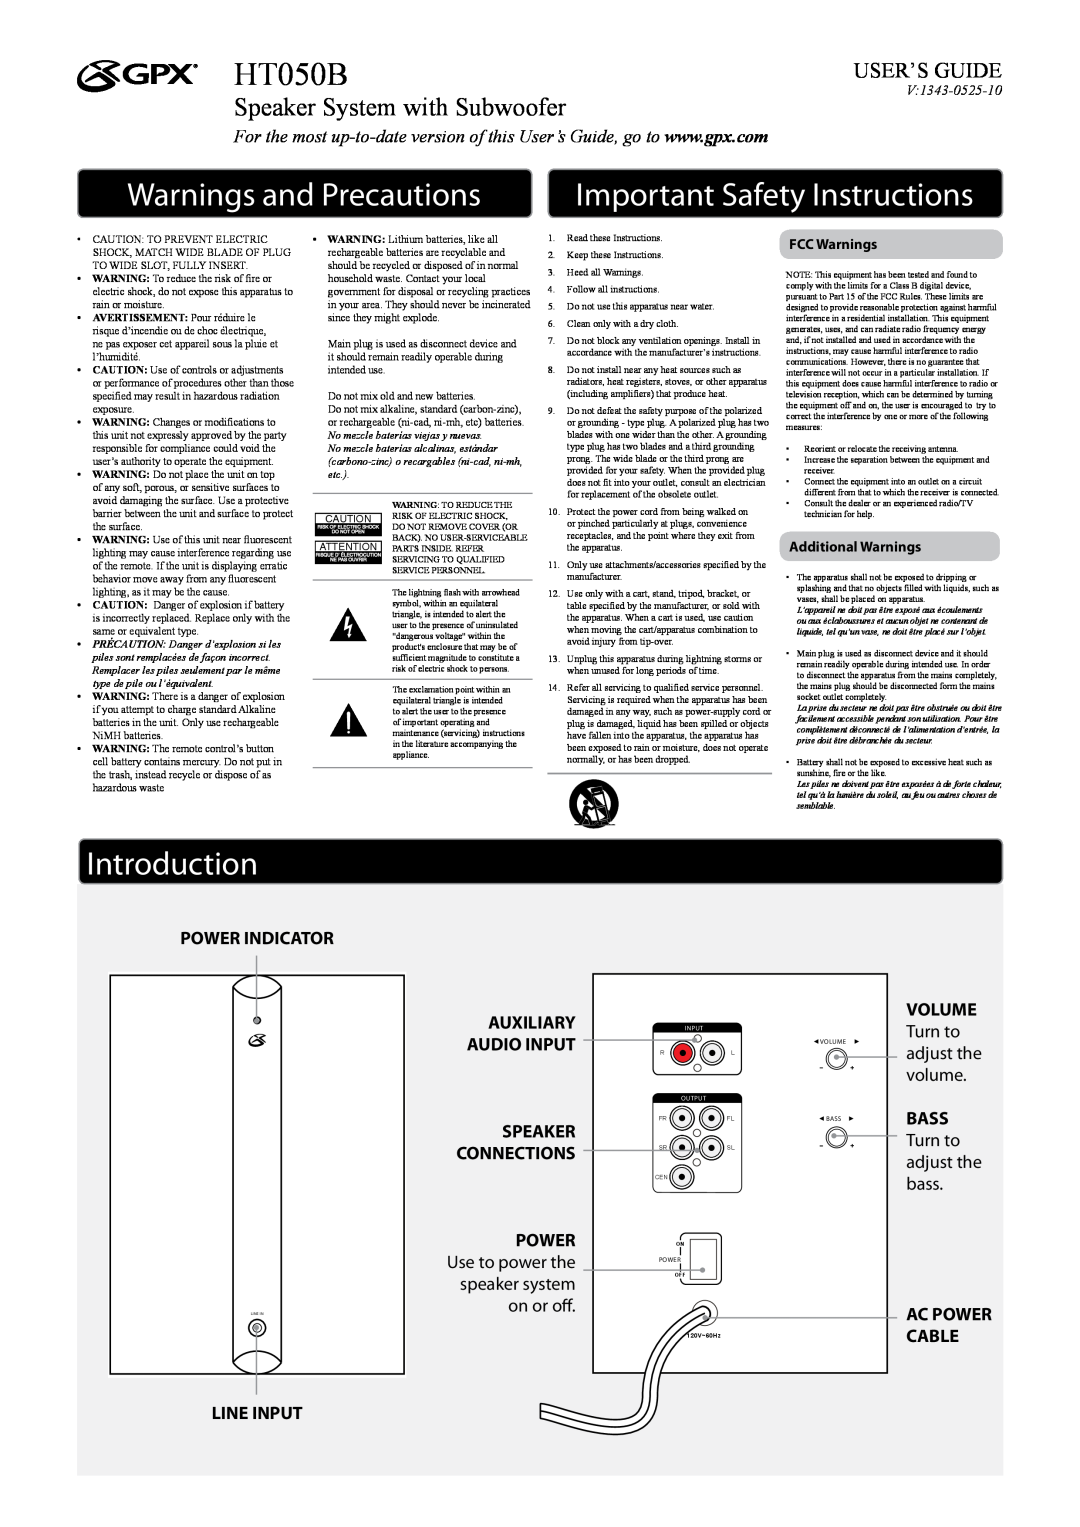 GPX HT050B important safety instructions Warnings and Precautions, Important Safety Instructions, Introduction 